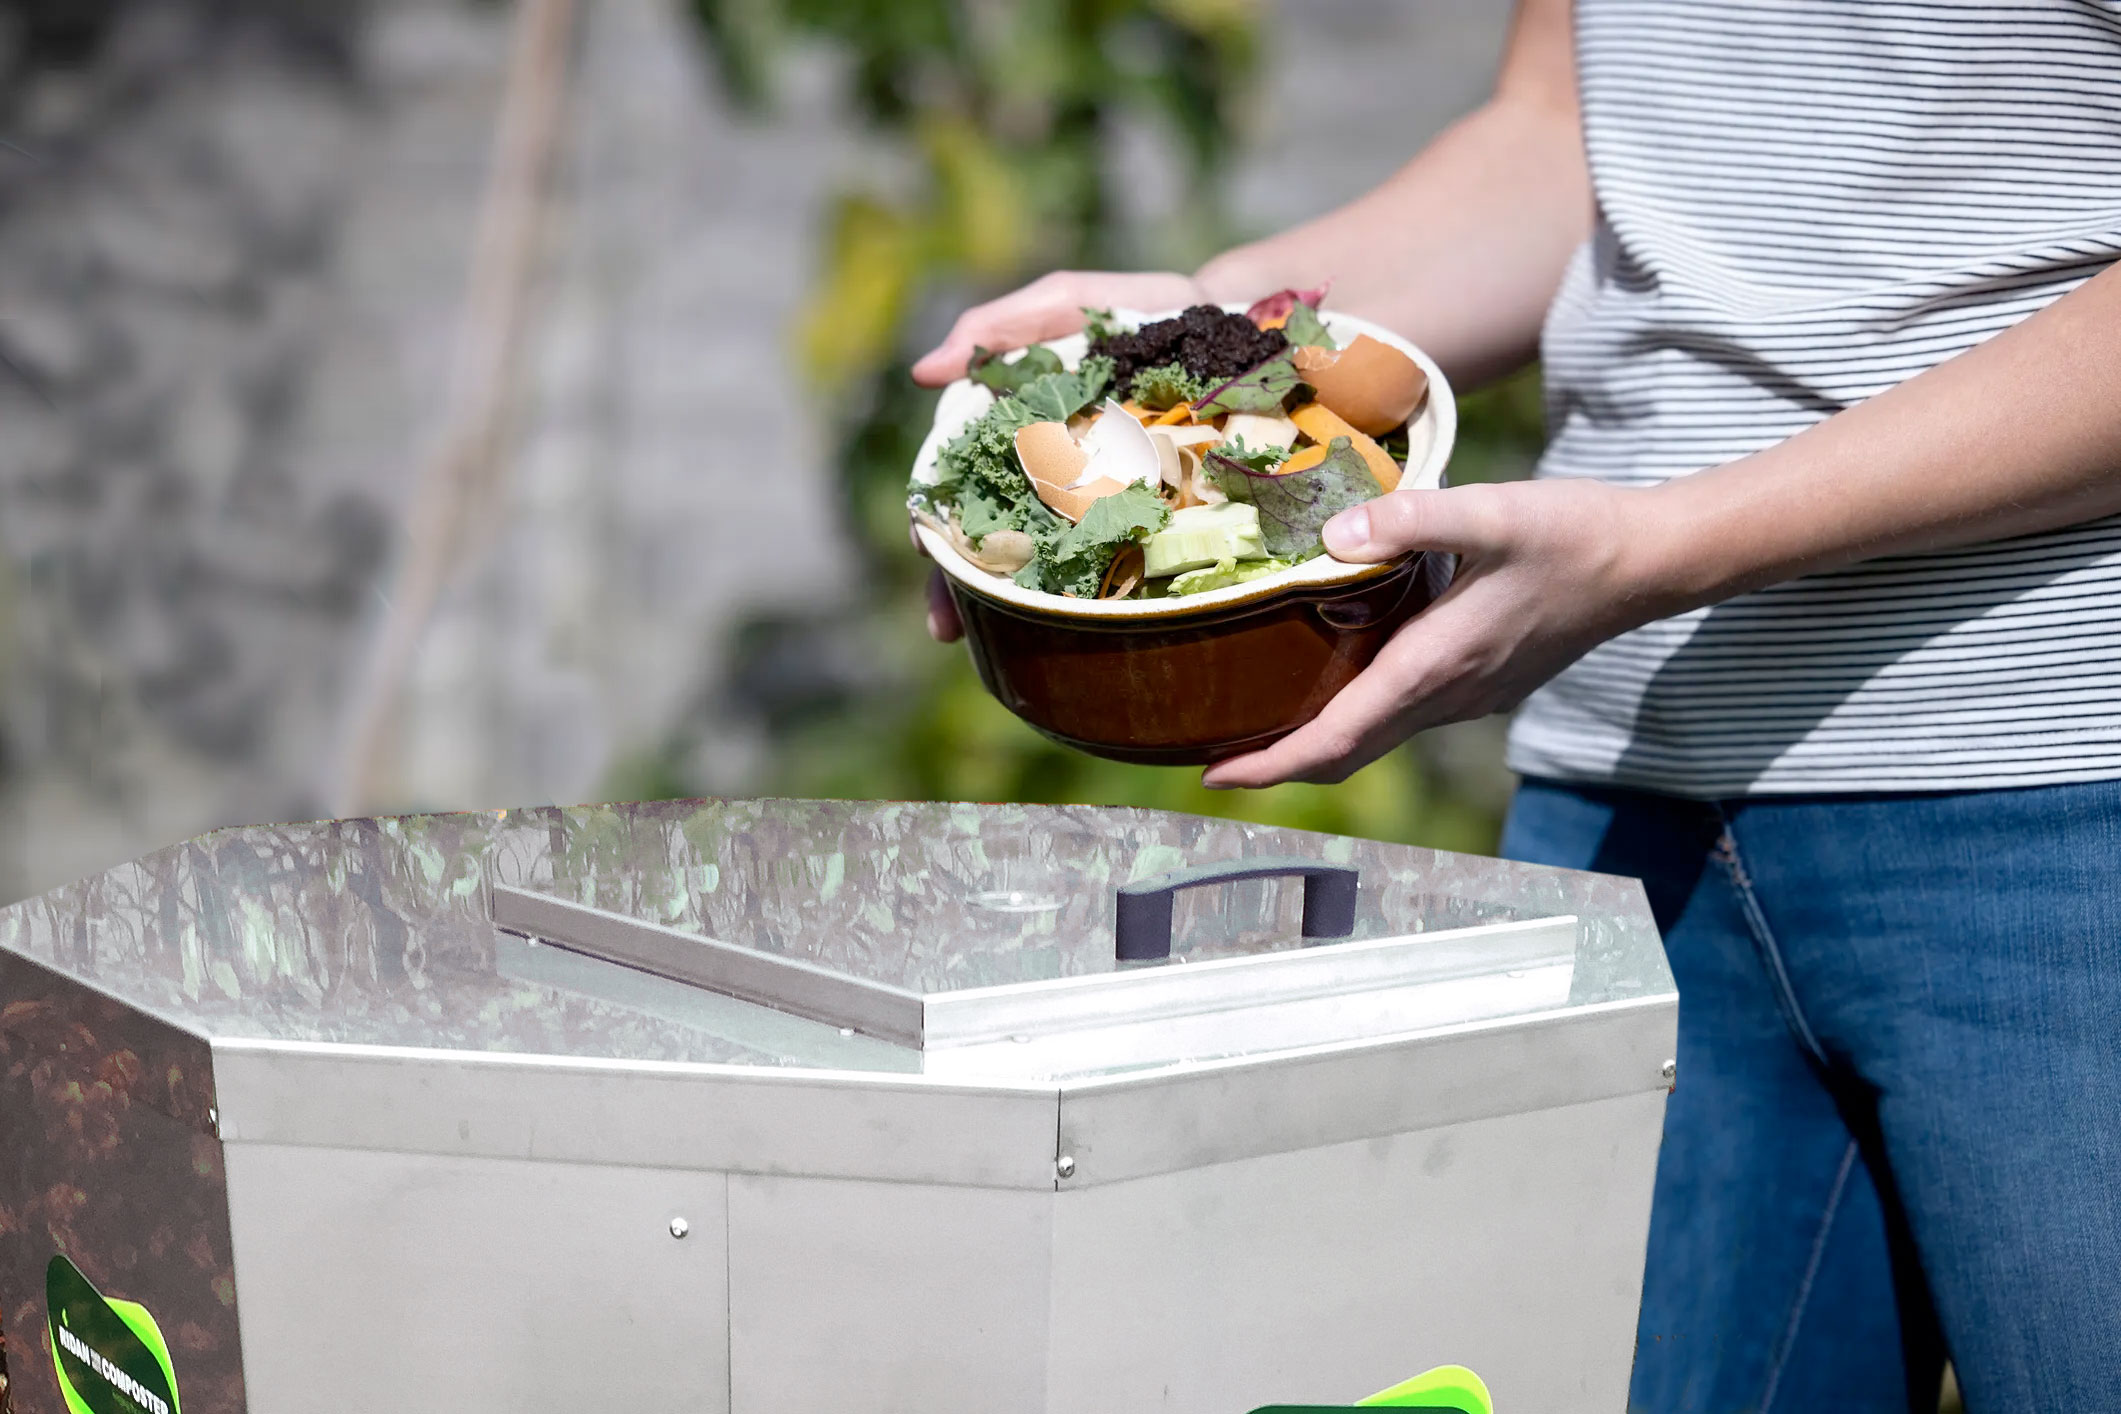 emptying food waste into Ridan composter